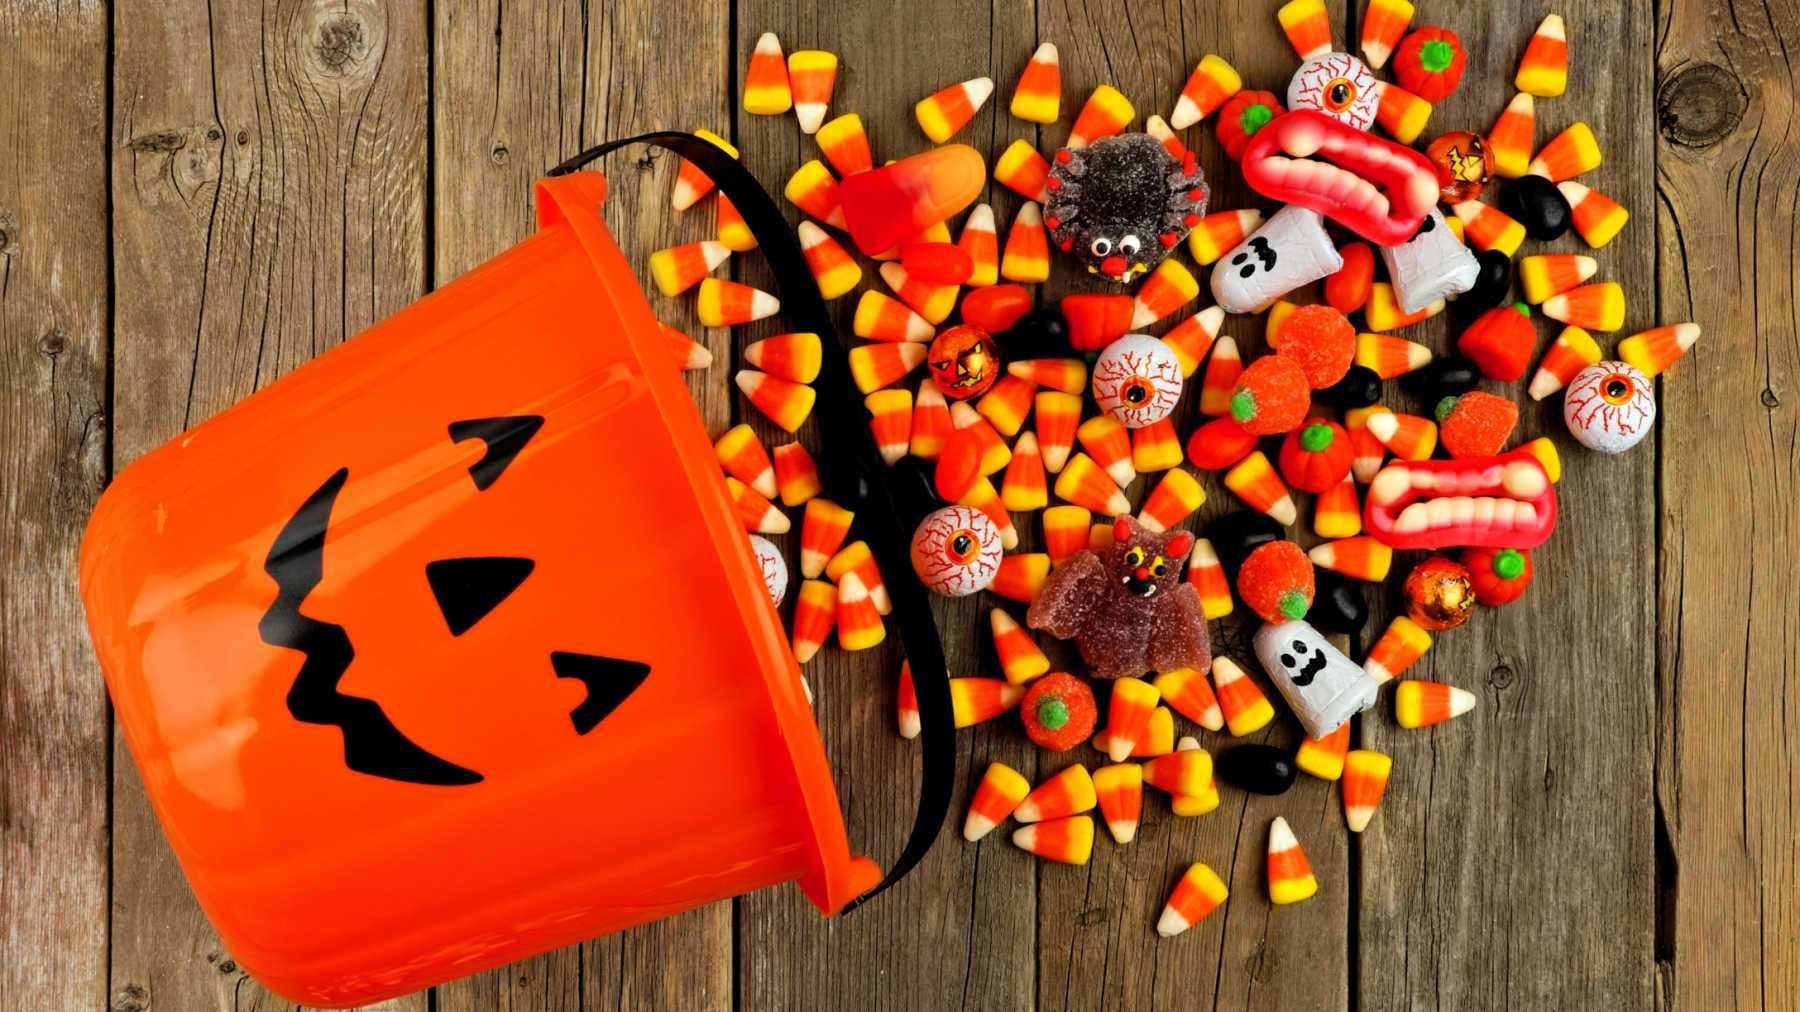 30 Facts About Candy Corn And Other Halloween Treats